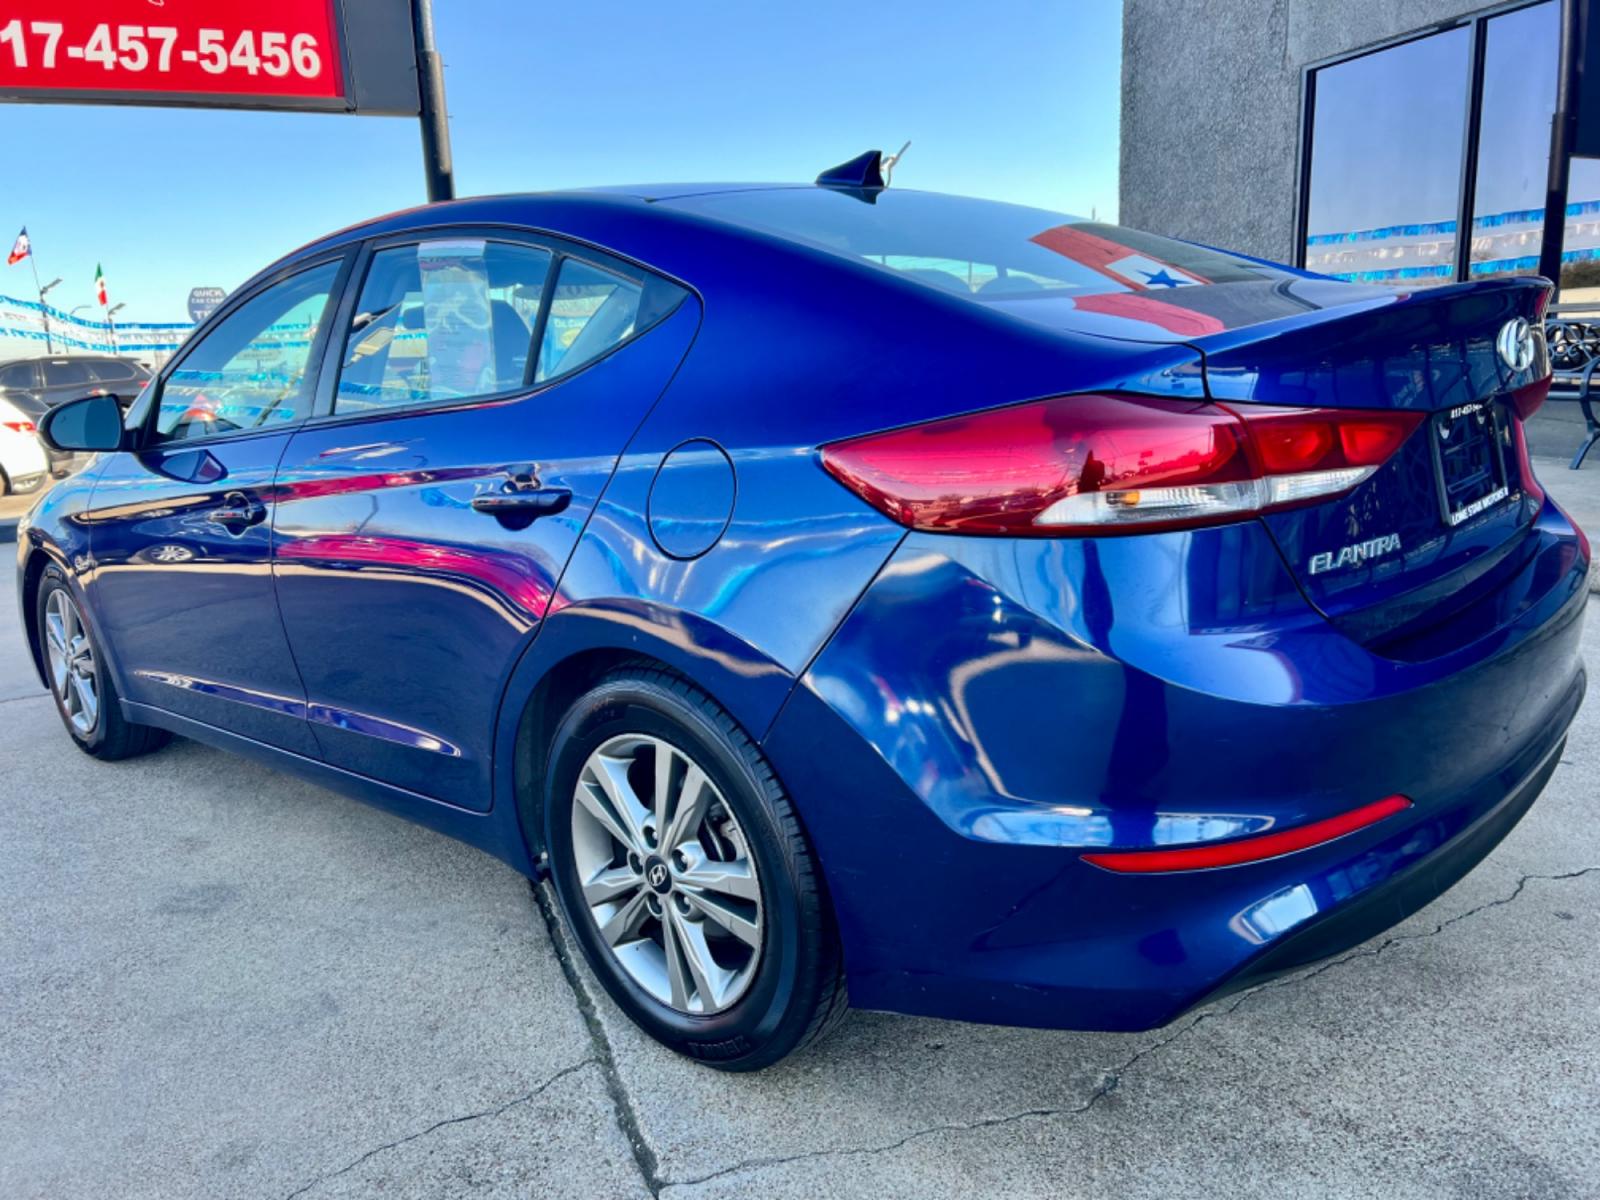 2018 BLUE /Gray HYUNDAI ELANTRA Limited 4dr Sedan (5NPD84LF3JH) with an 2.0L I4 engine, Automatic 6-Speed transmission, located at 5900 E. Lancaster Ave., Fort Worth, TX, 76112, (817) 457-5456, 0.000000, 0.000000 - This is a 2018 HYUNDAI ELANTRA 4 DOOR SEDAN that is in excellent condition. There are no dents or scratches. The interior is clean with no rips or tears or stains. All power windows, door locks and seats. Ice cold AC for those hot Texas summer days. It is equipped with a CD player, AM/FM radio, AUX - Photo #3